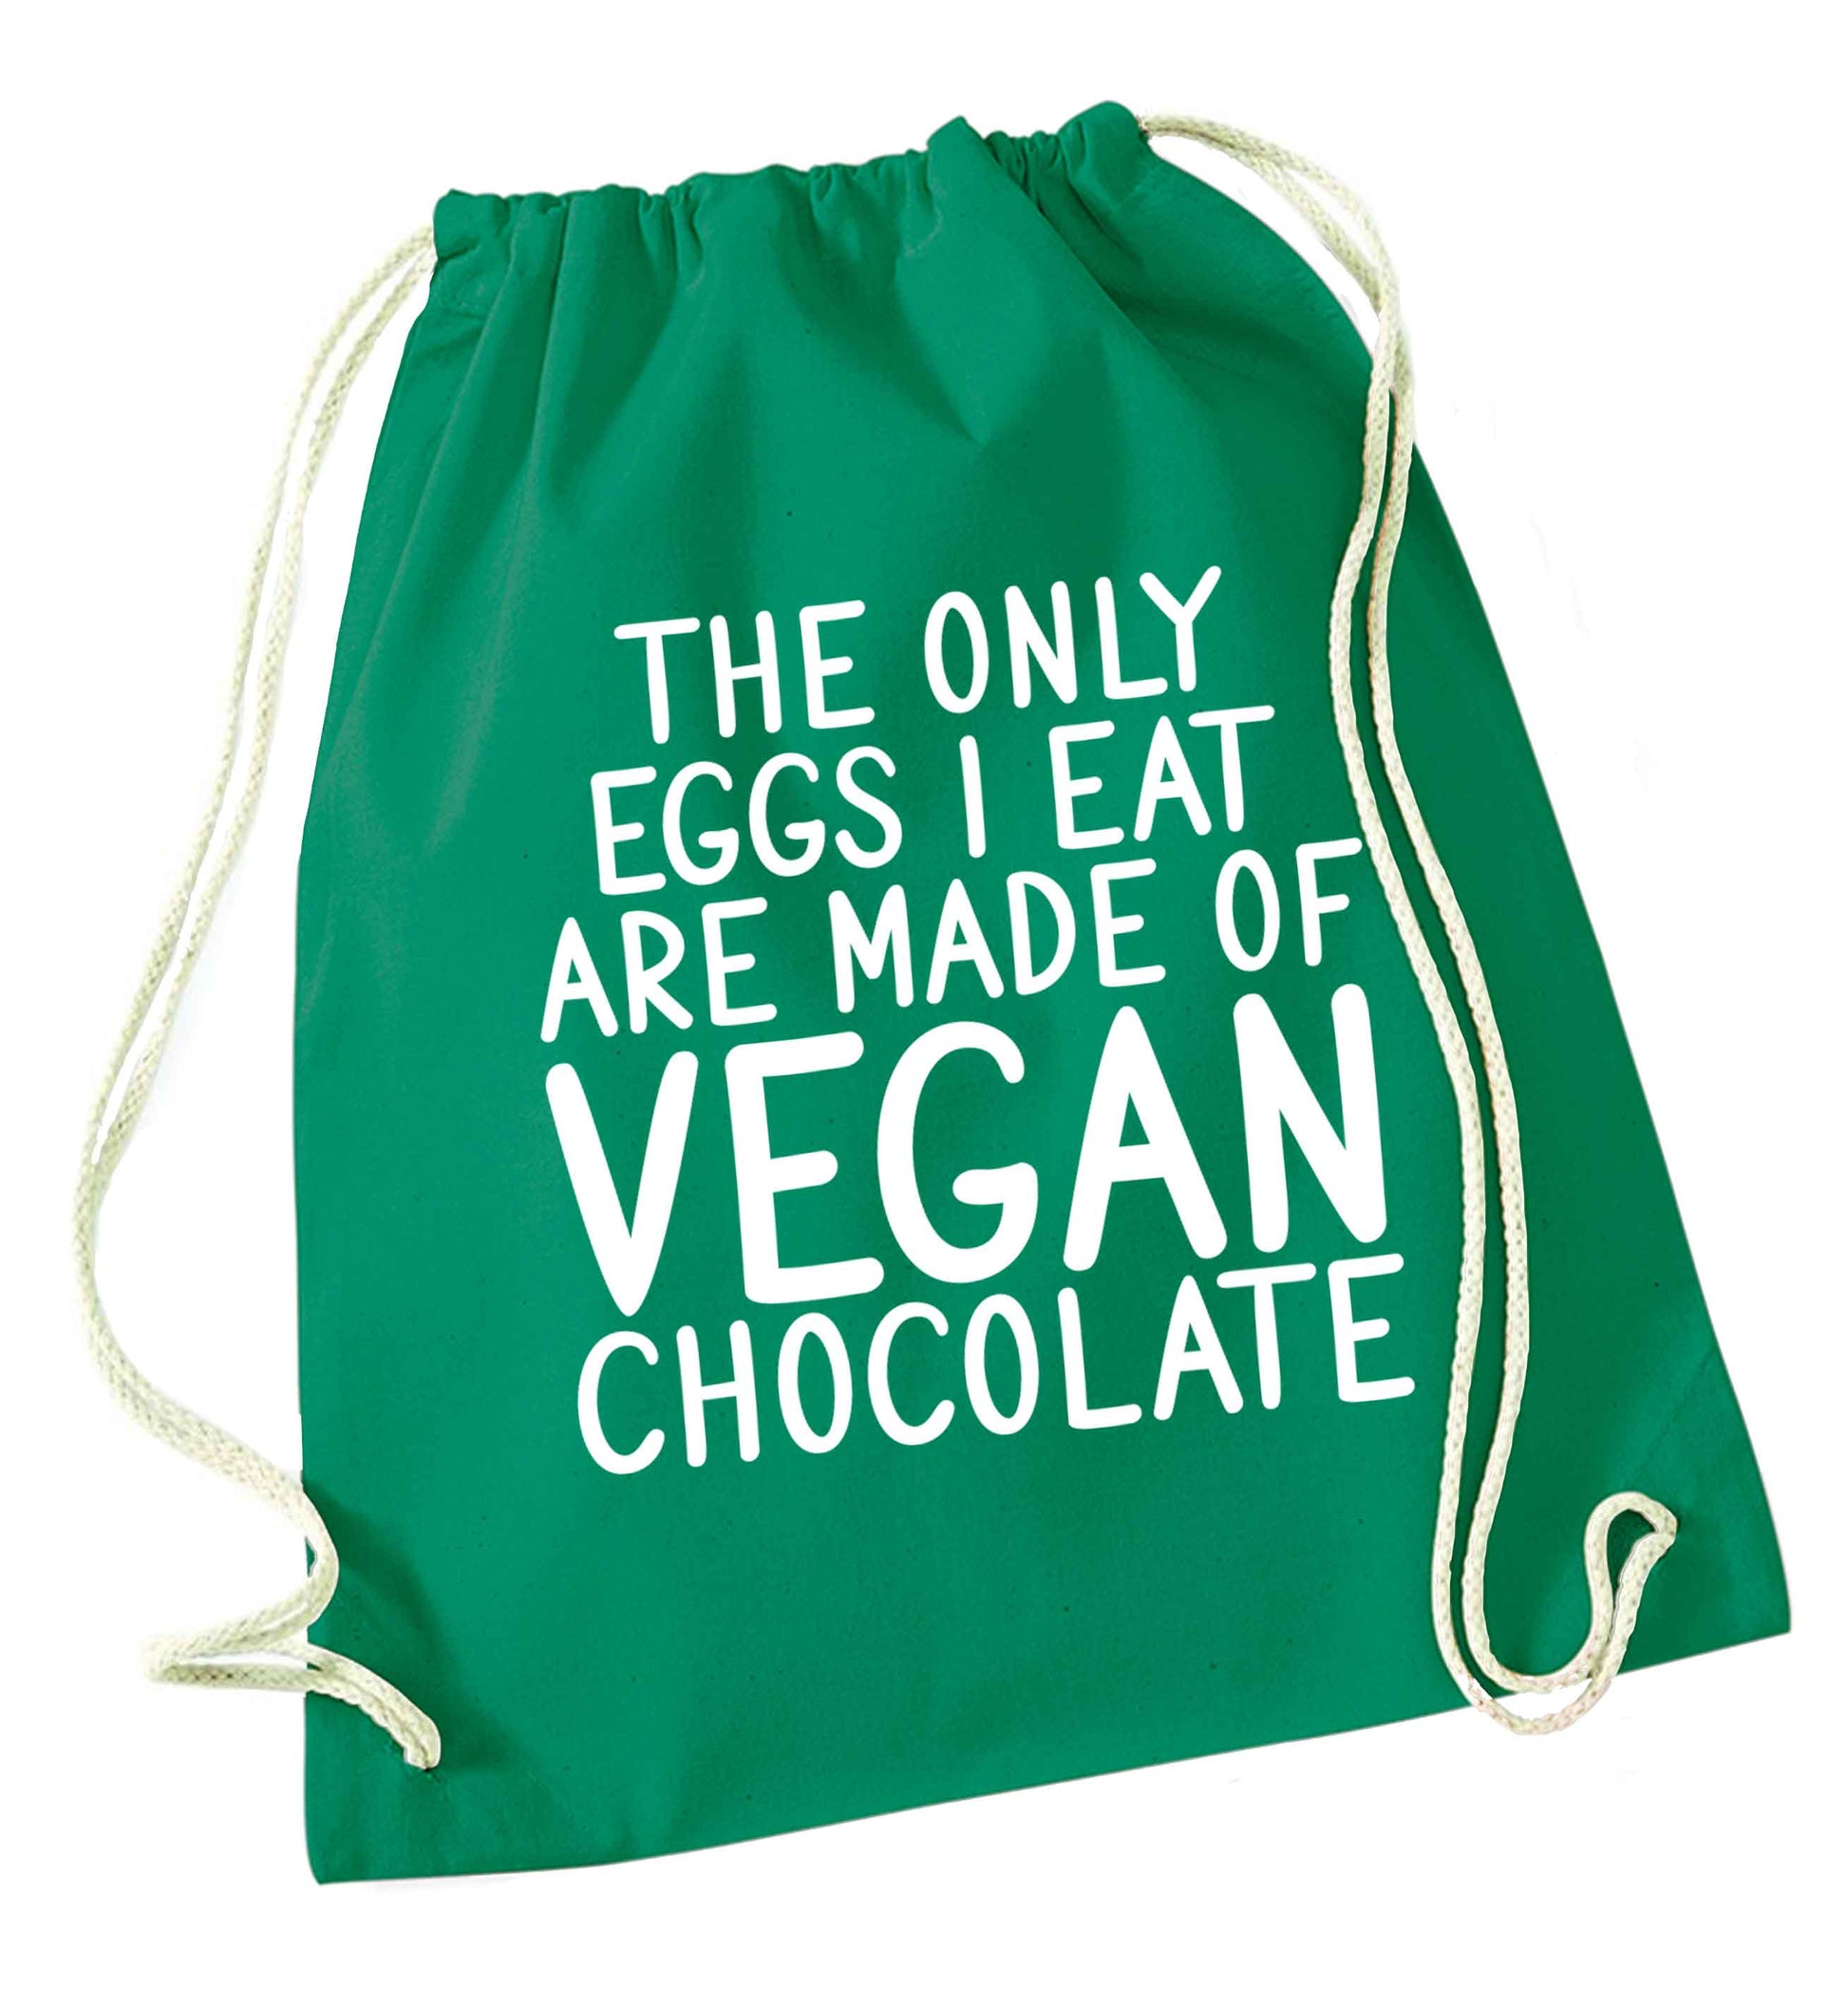 The only eggs I eat are made of vegan chocolate green drawstring bag